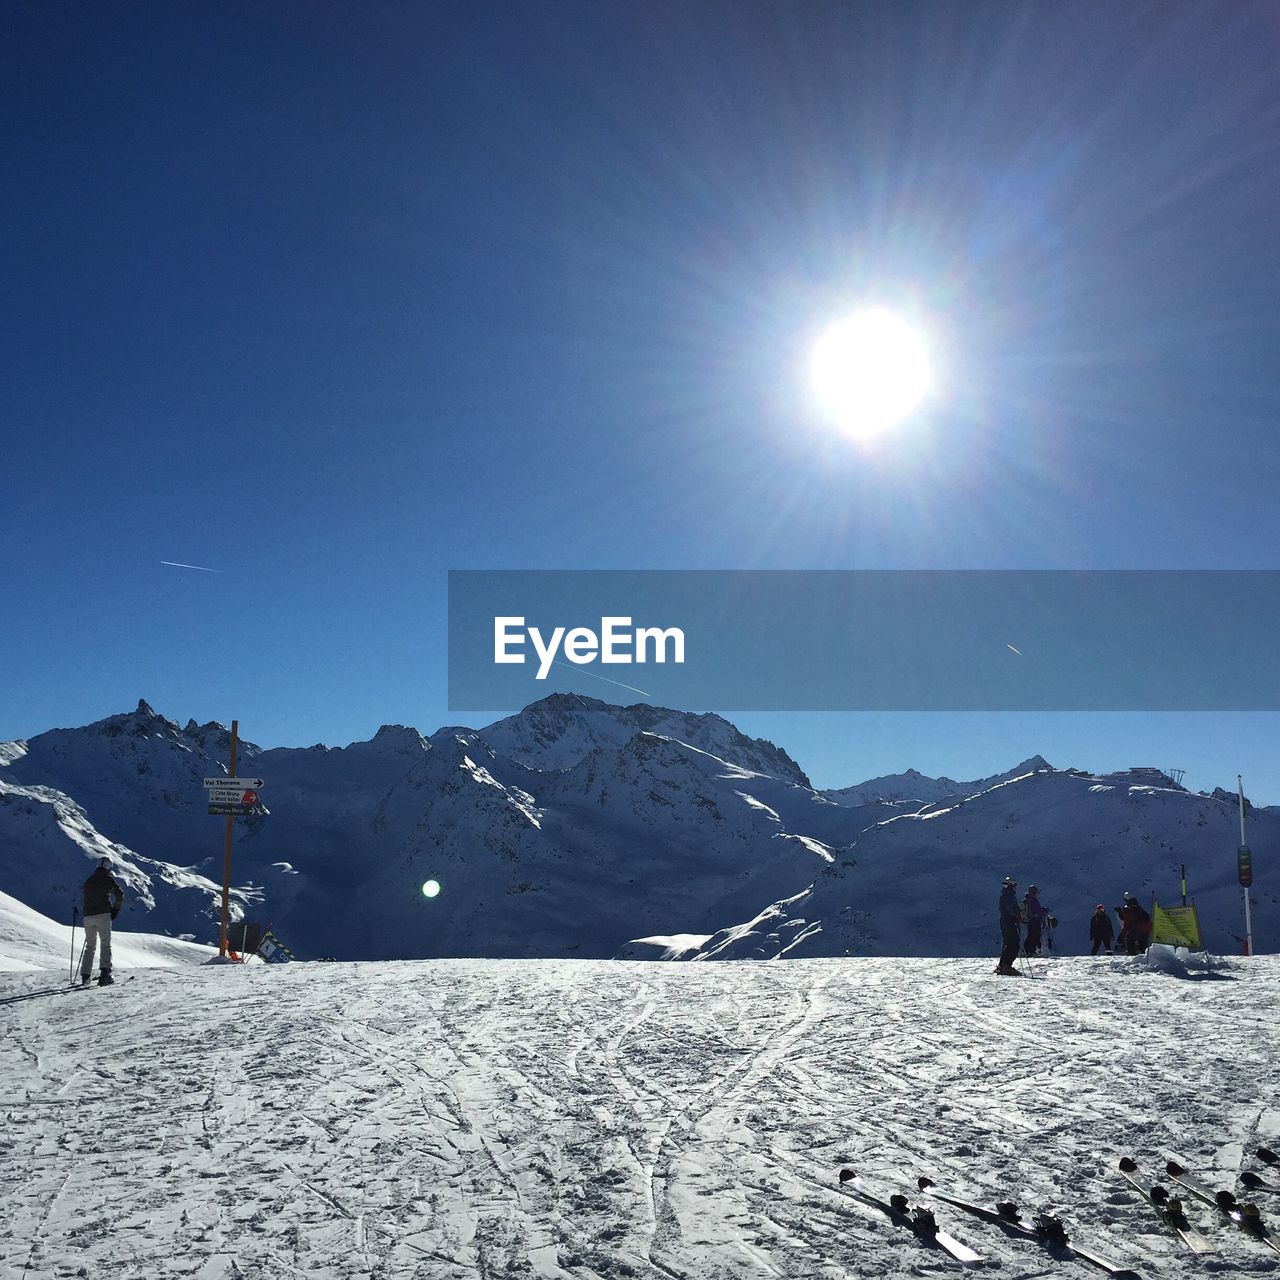 People skiing on snowy mountains against blue sky during sunny day